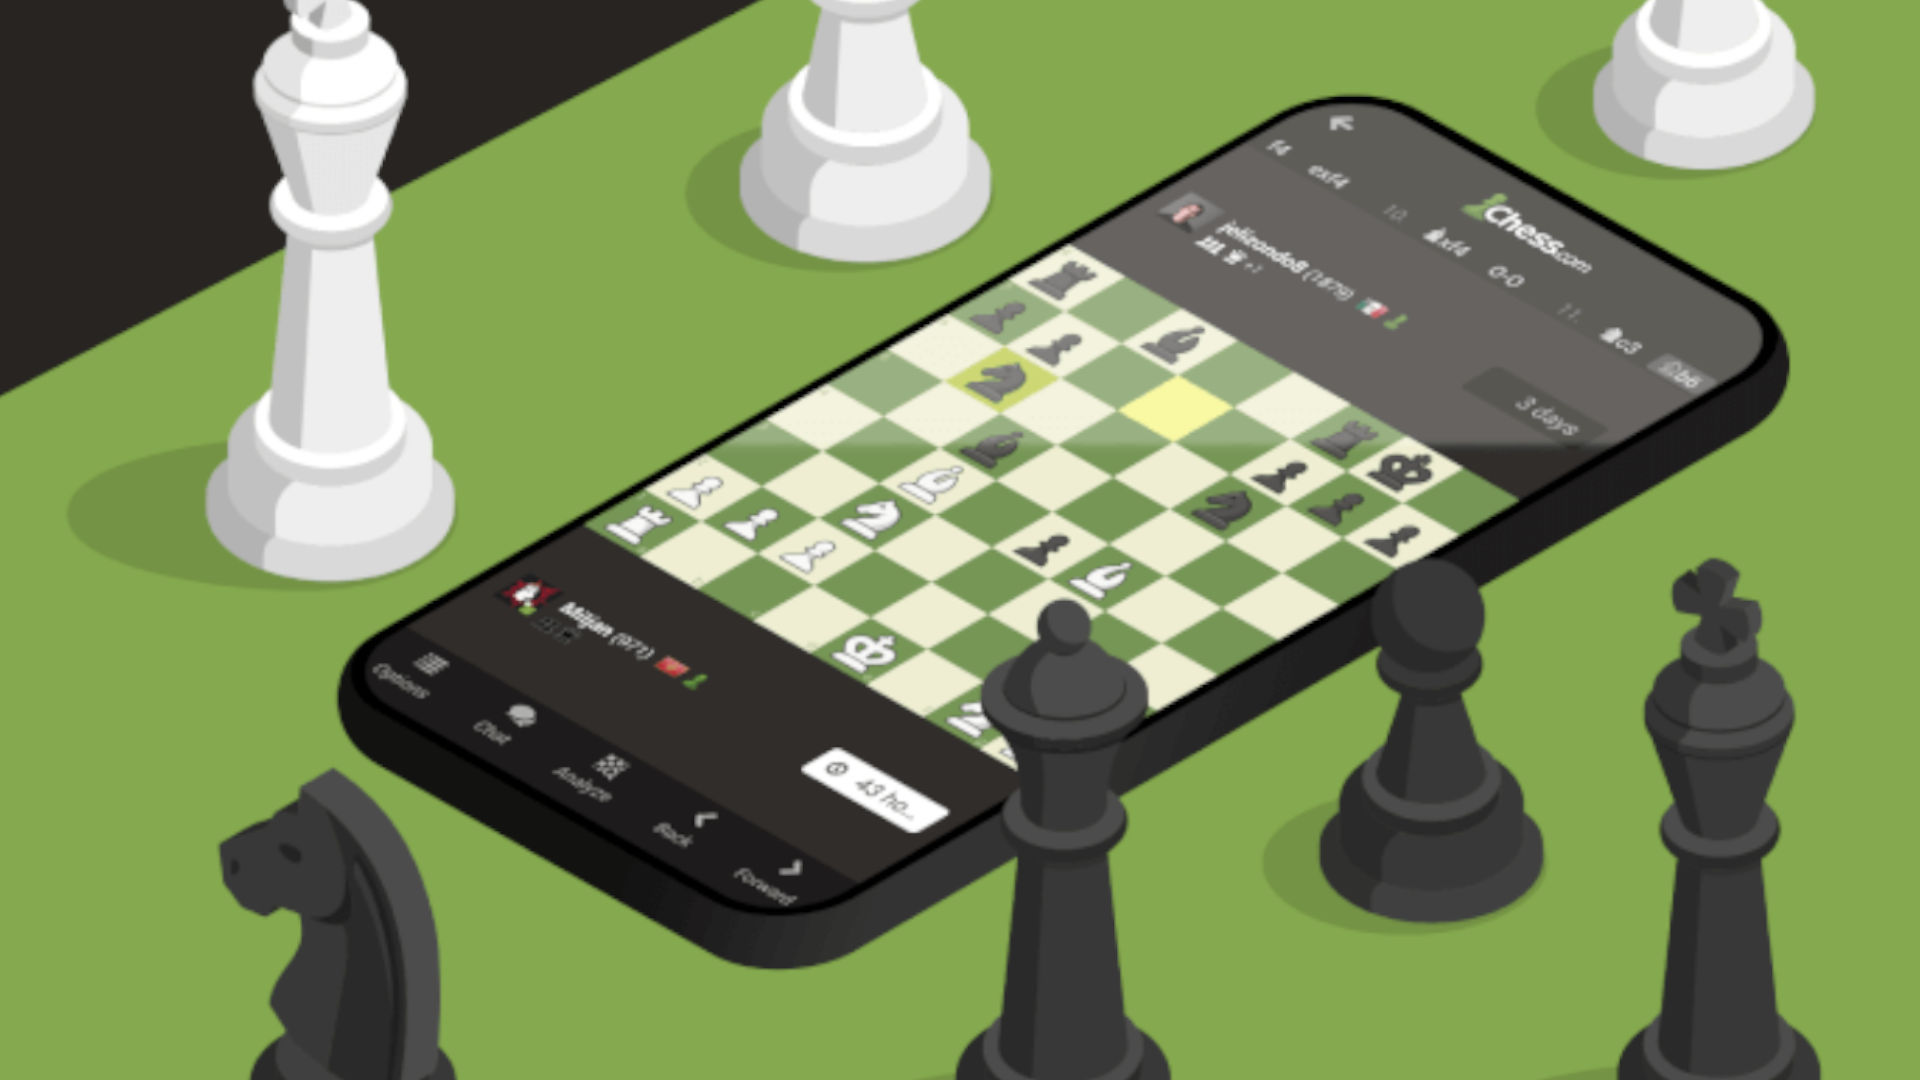 Perfect Chess Trainer – Apps on Google Play